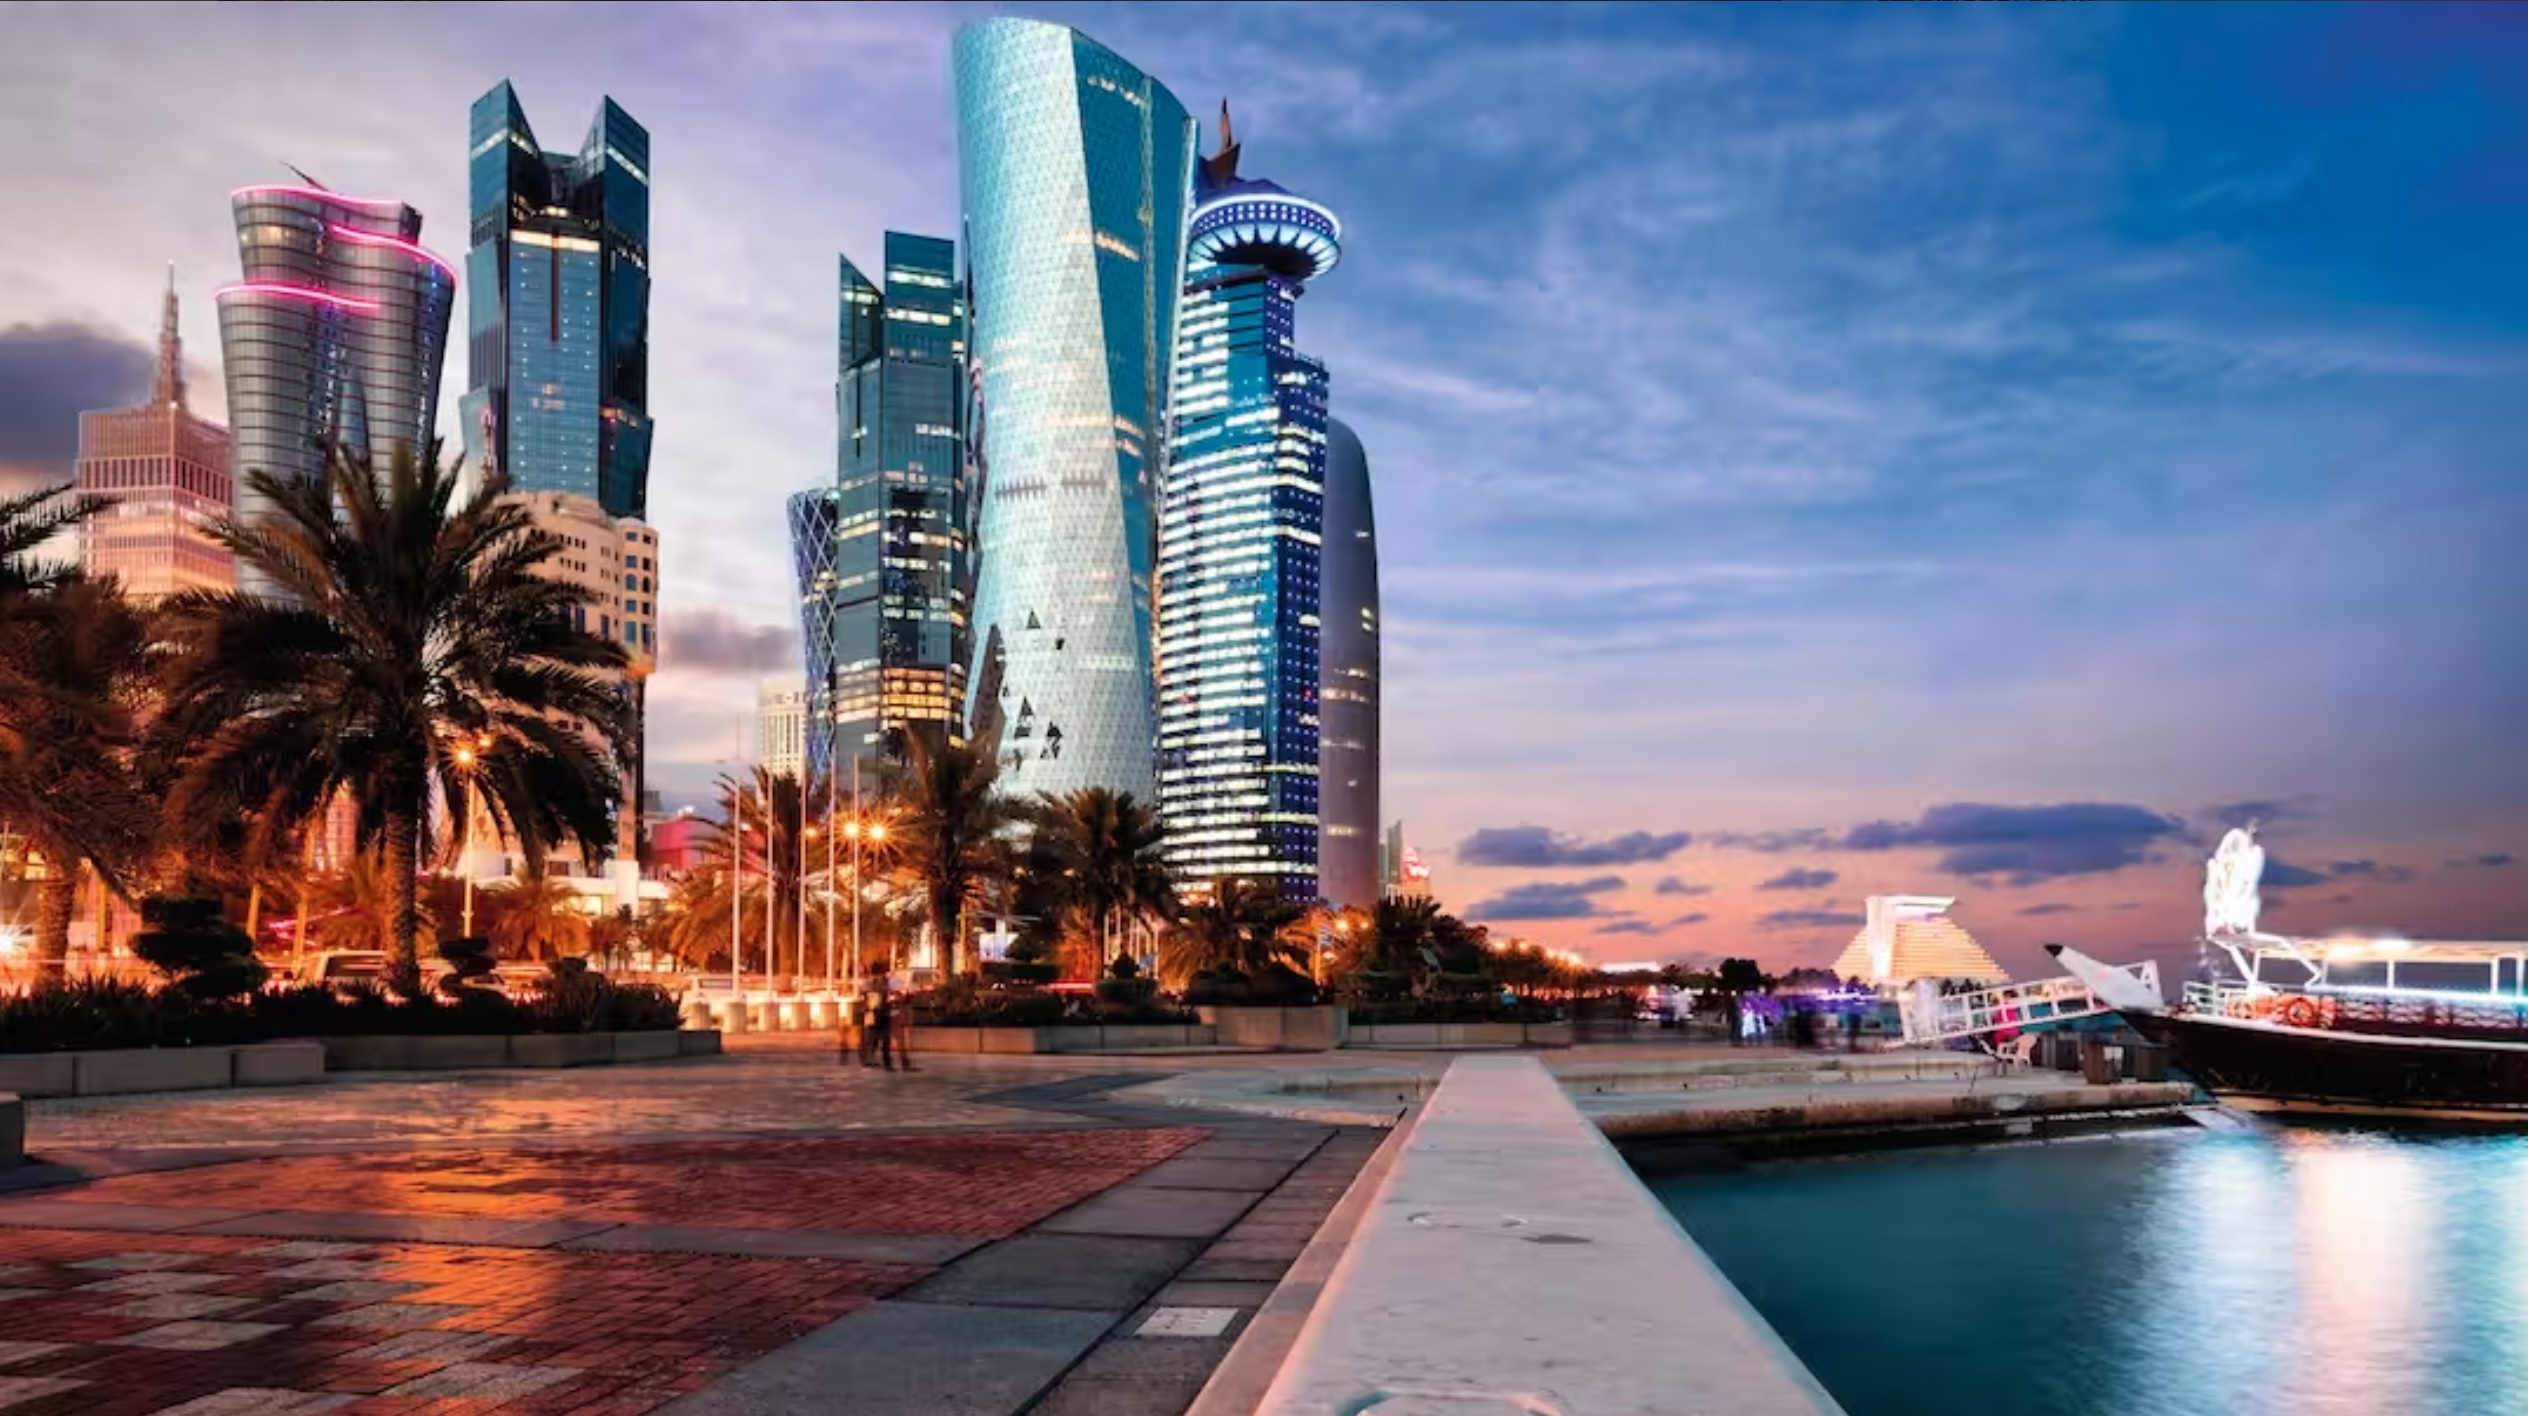 a view of Qatar city from the waterside promenade